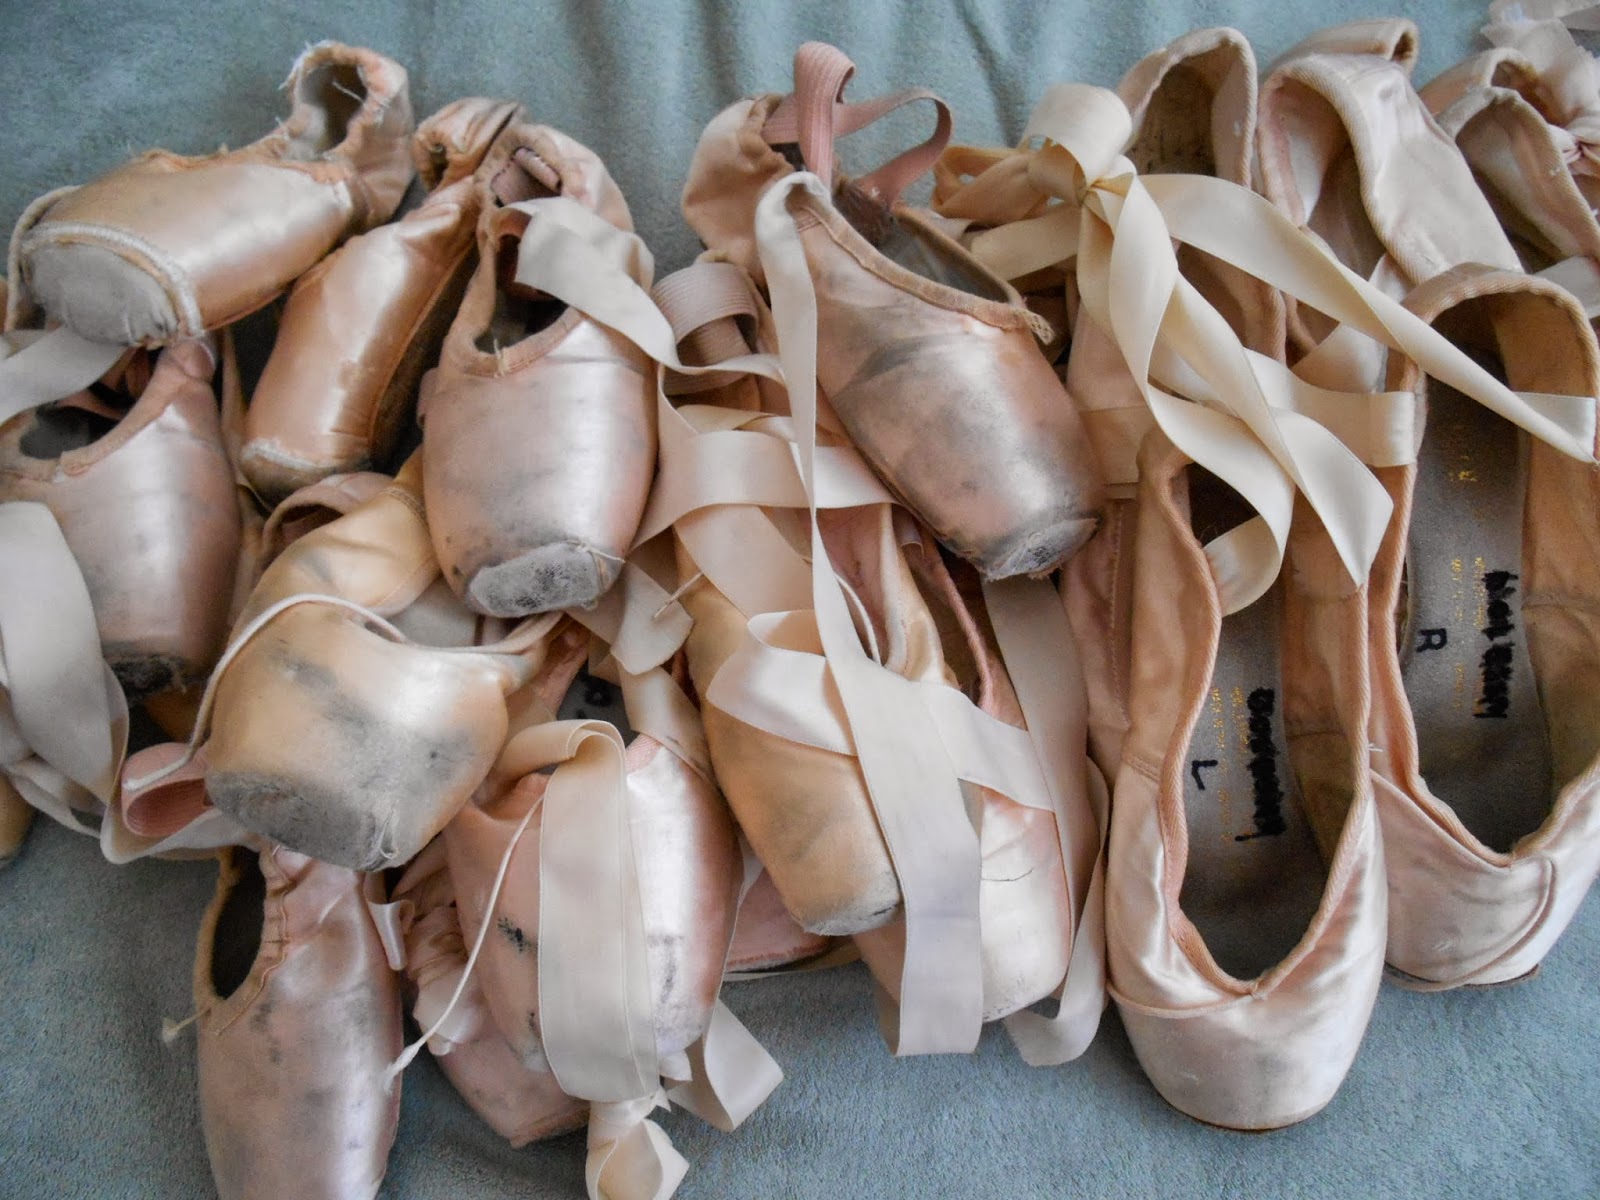 This Creative Obsession: Ballet pointe shoe obsession